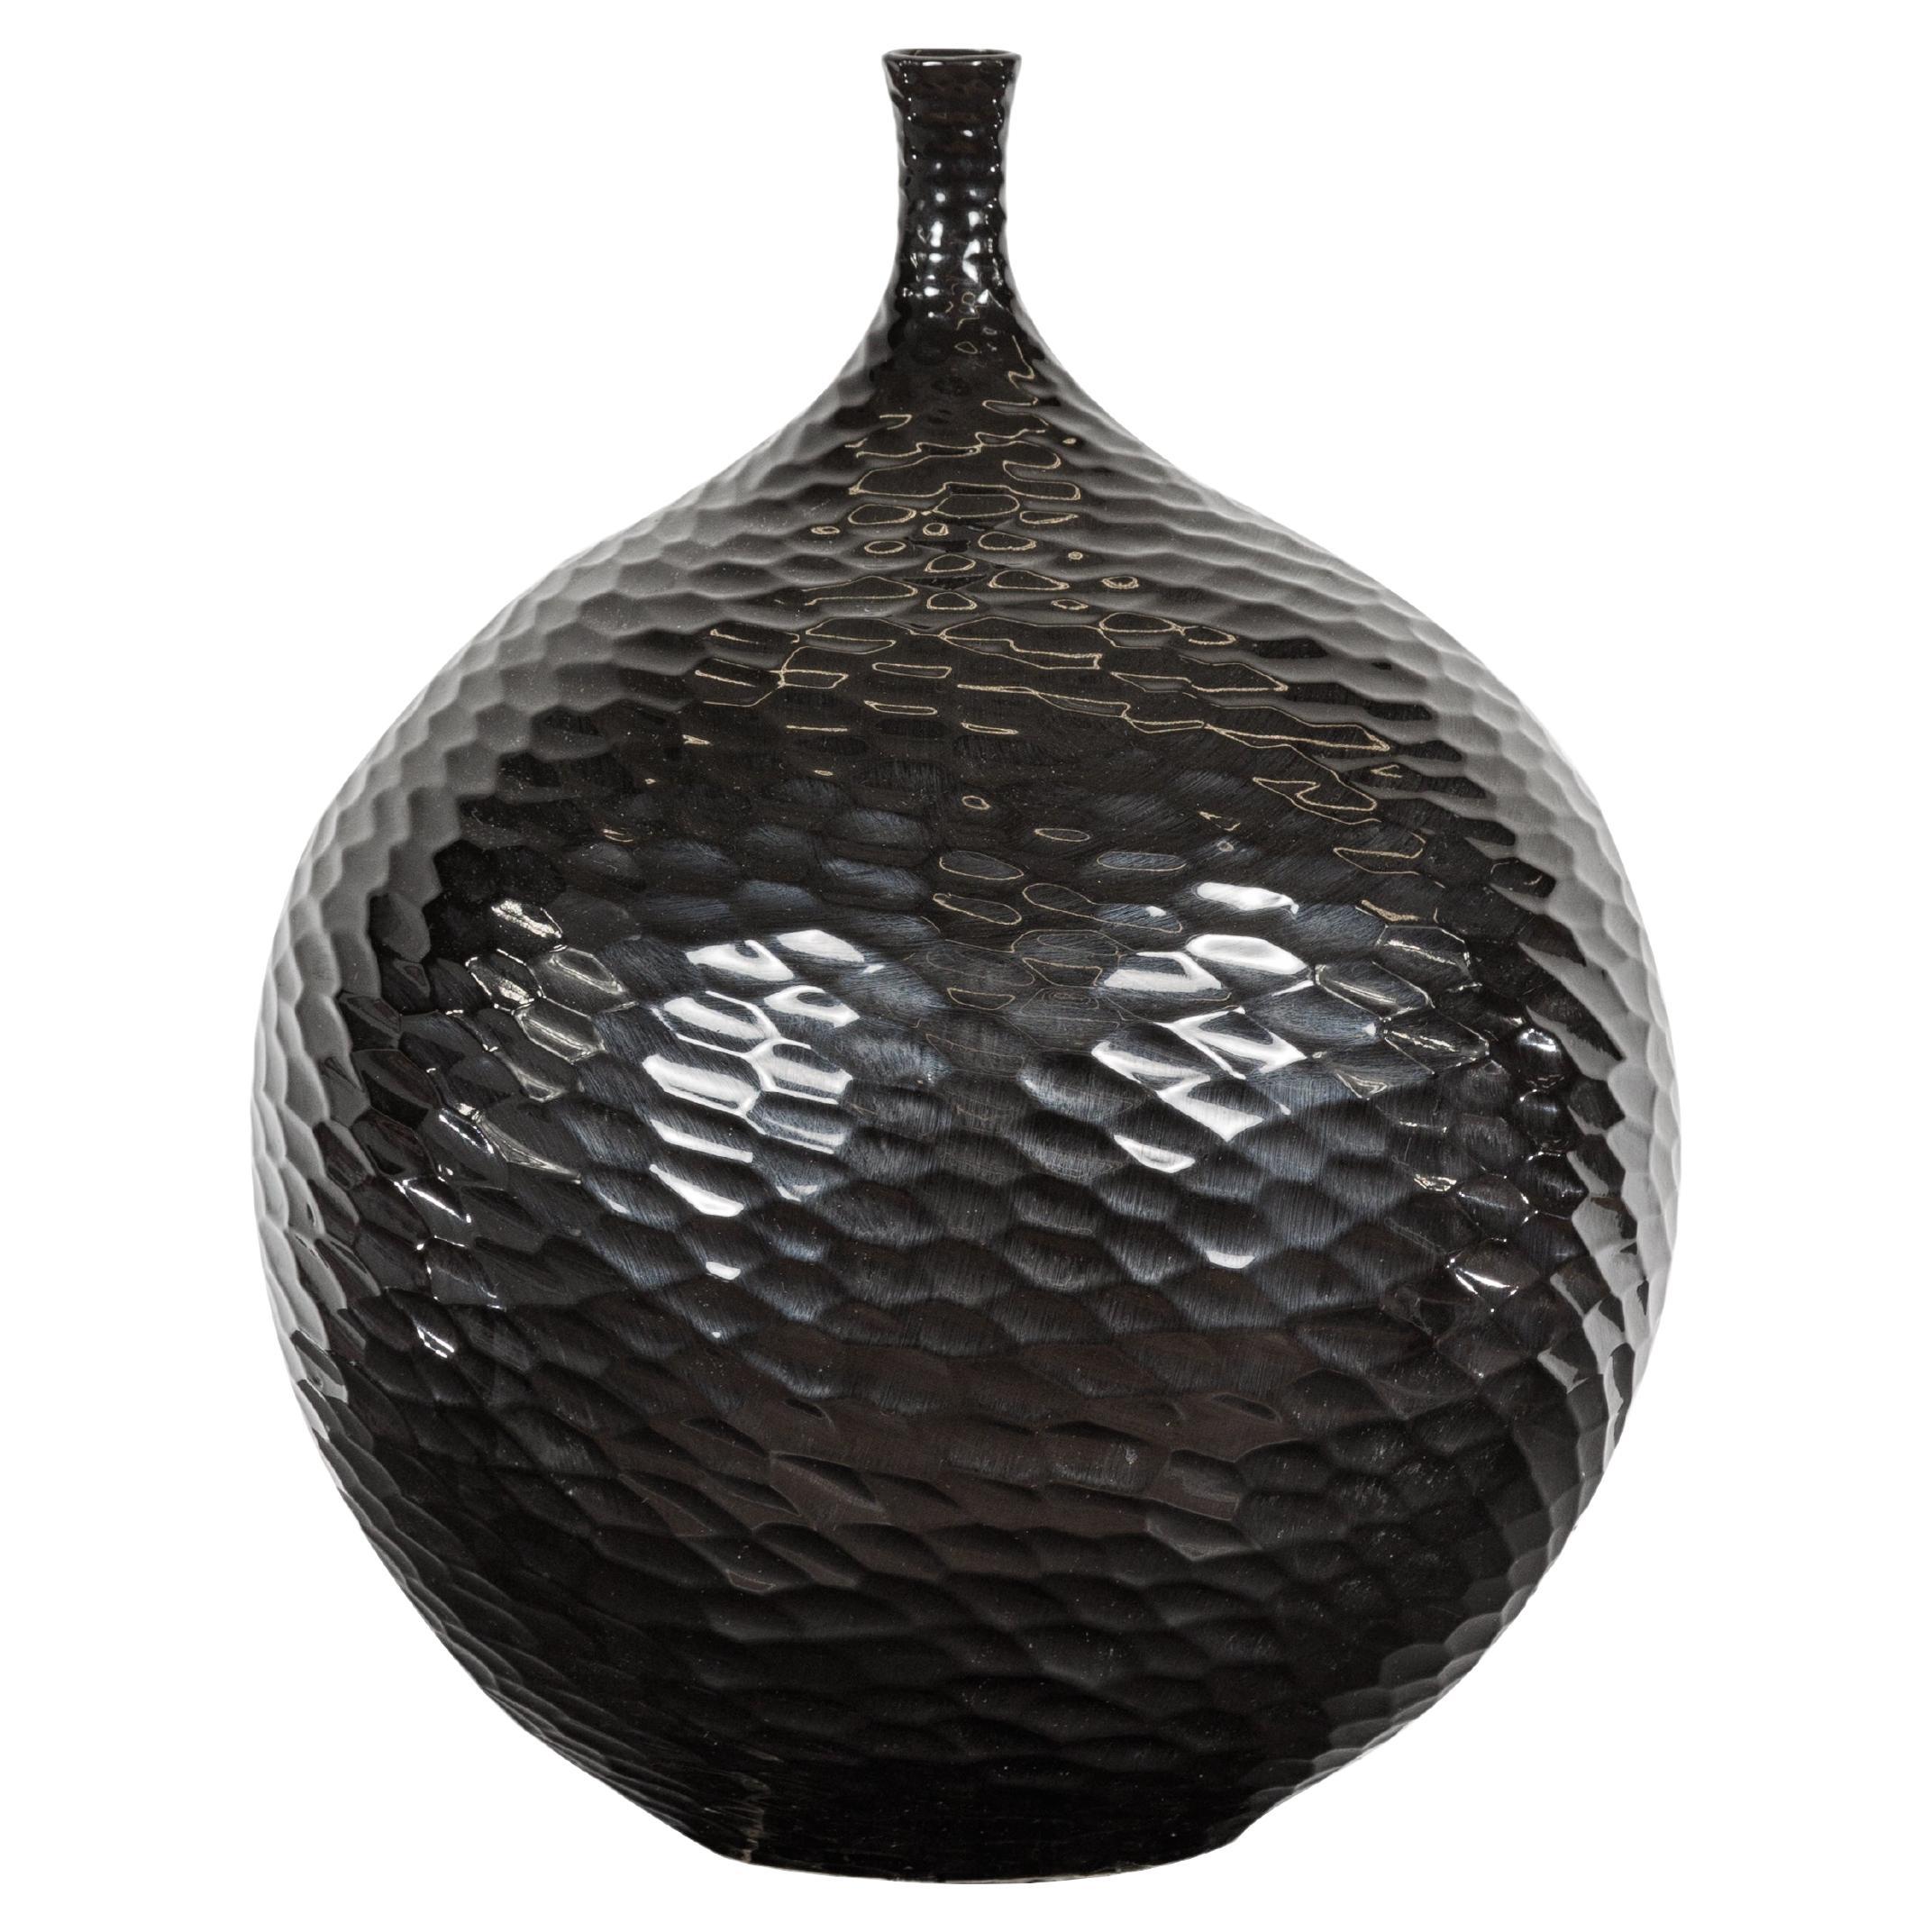 Artisan Black Glazed Bulb Shaped Vase with Honeycomb Patterns and Narrow Mouth